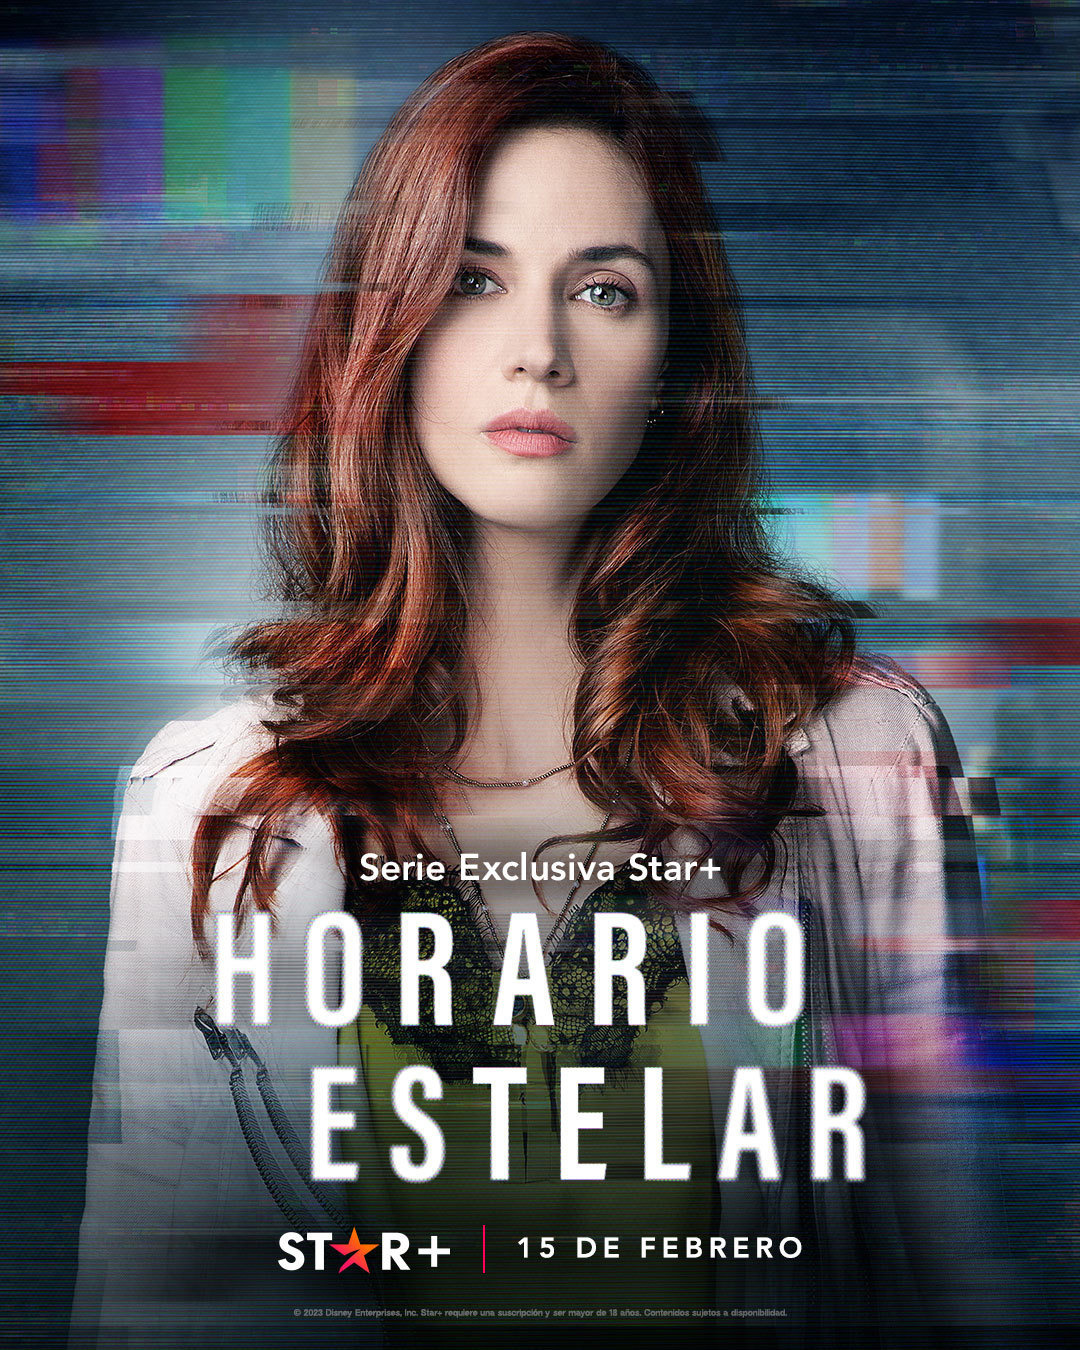 Extra Large TV Poster Image for Horario Estelar (#4 of 6)